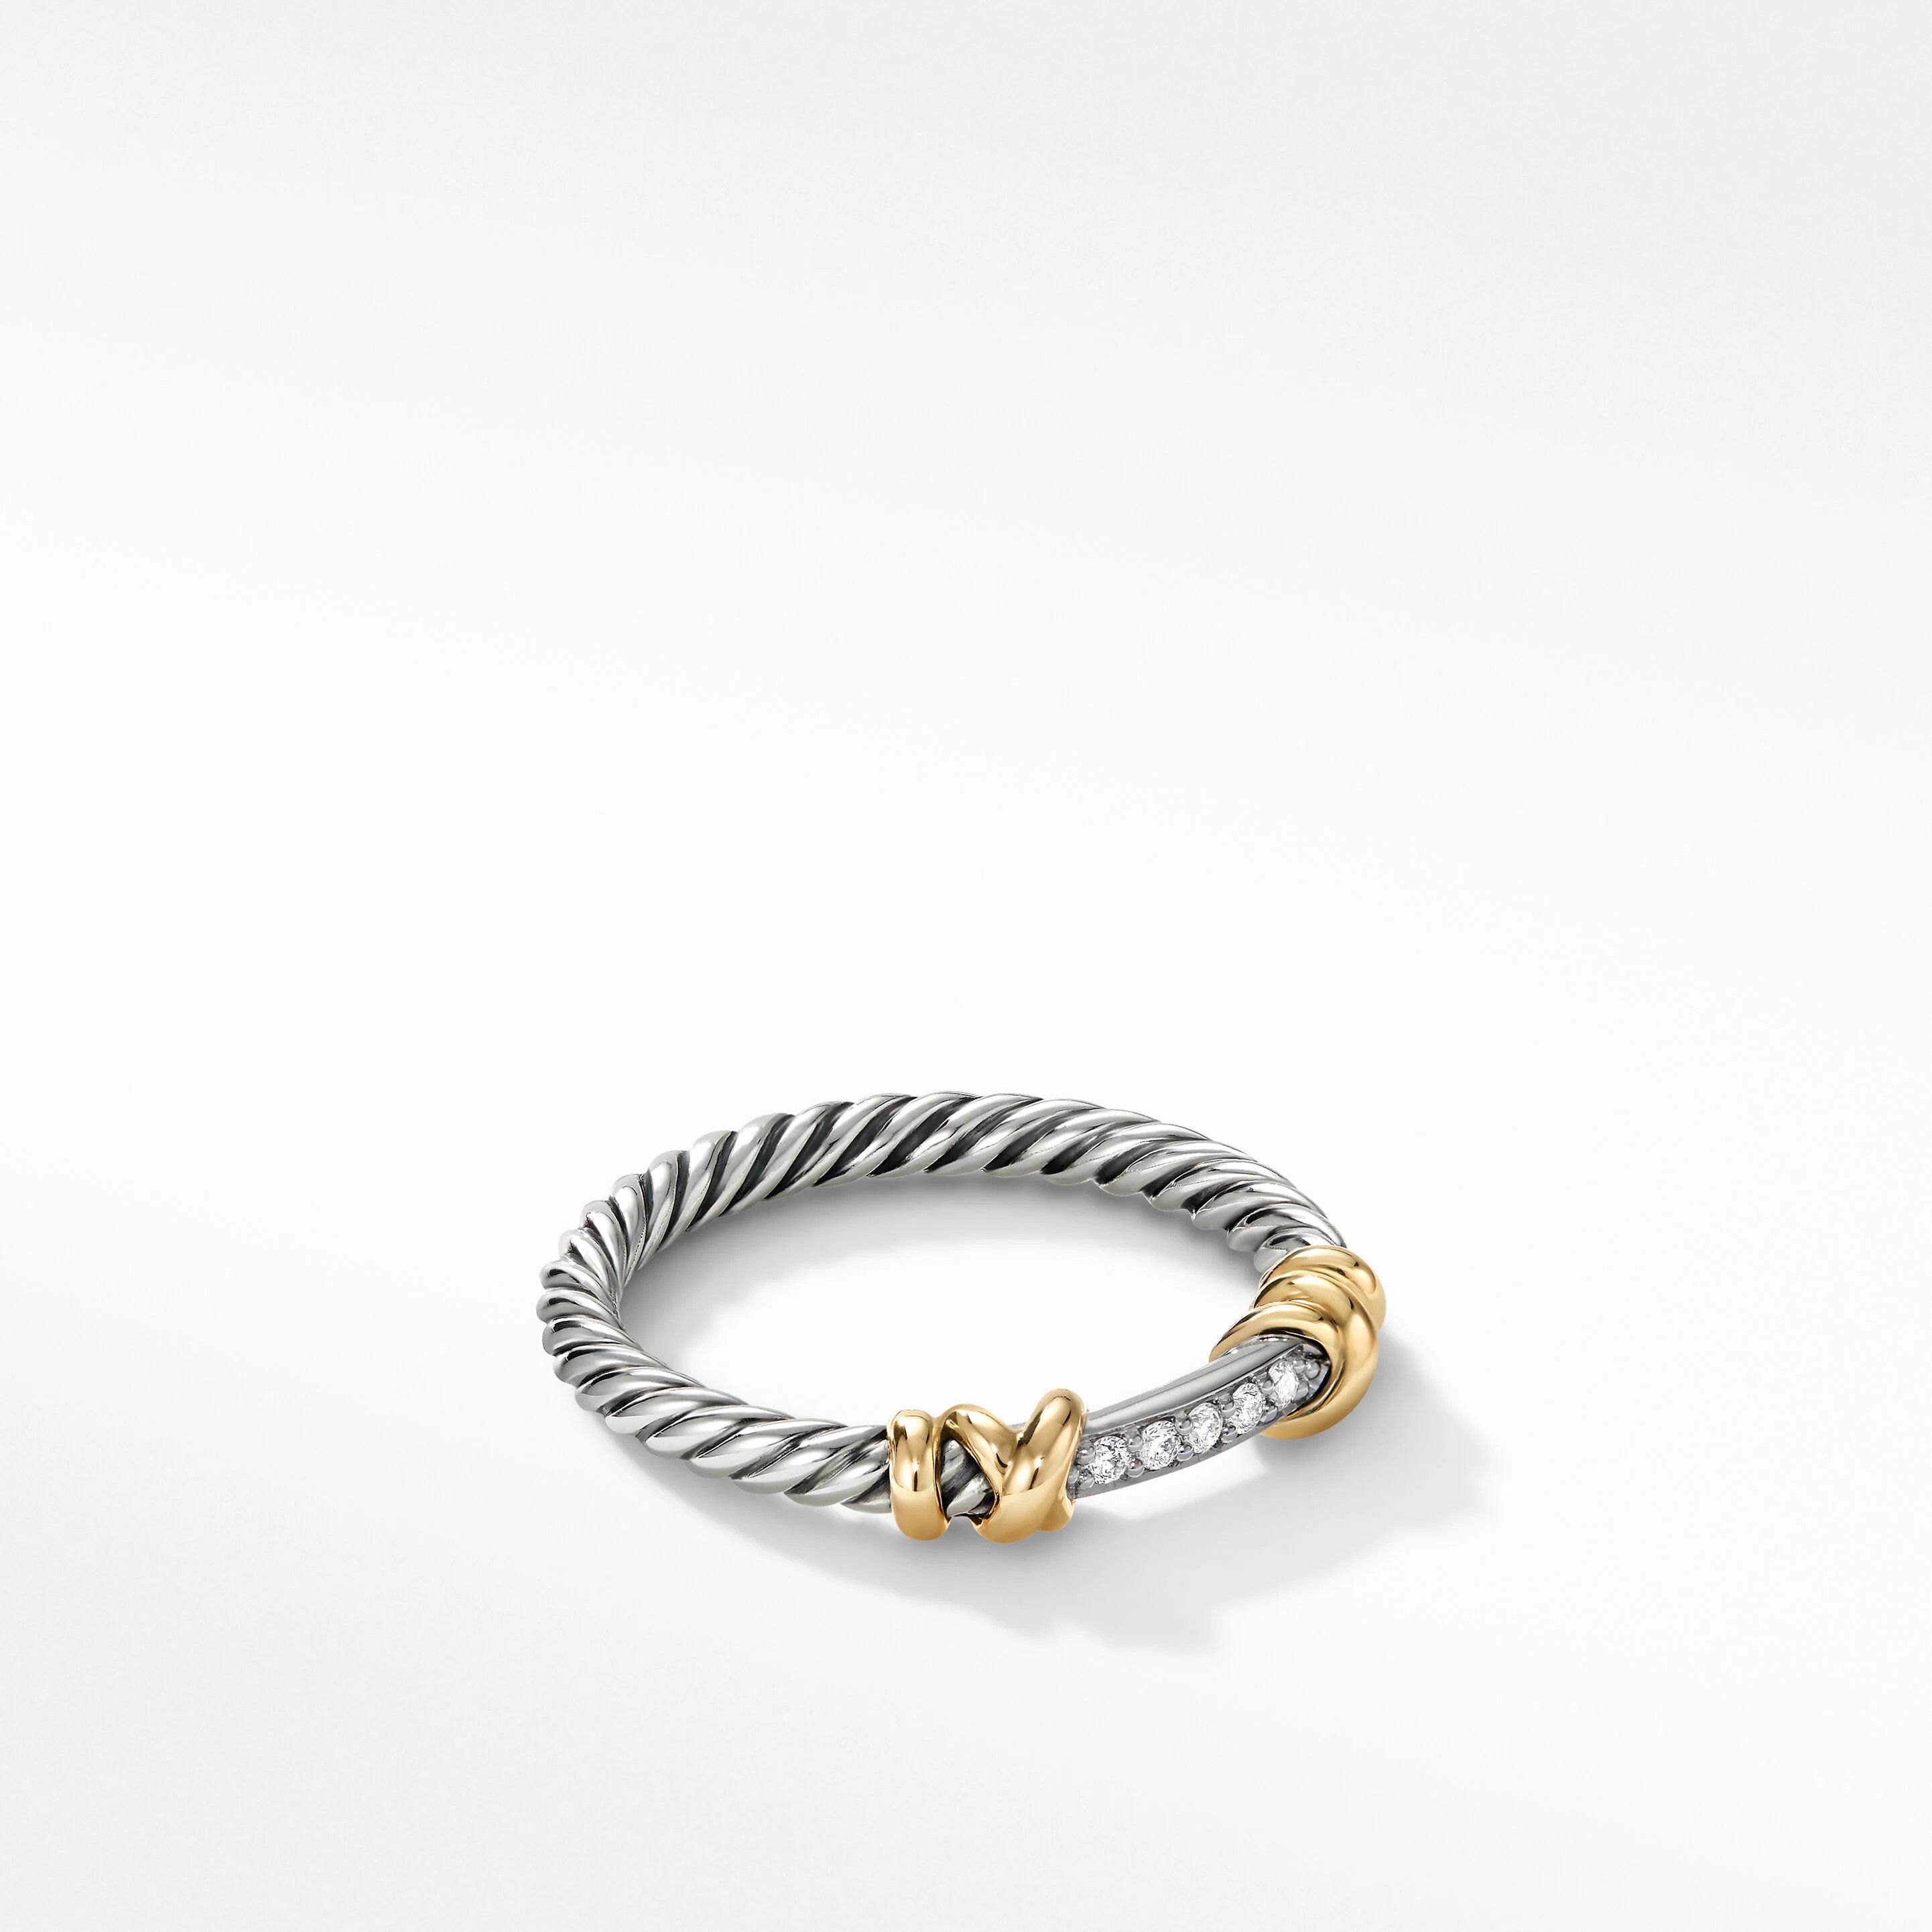 Petite Helena Wrap Band Ring in Sterling Silver with 18K Yellow Gold and Pavé Diamonds | David Yurman